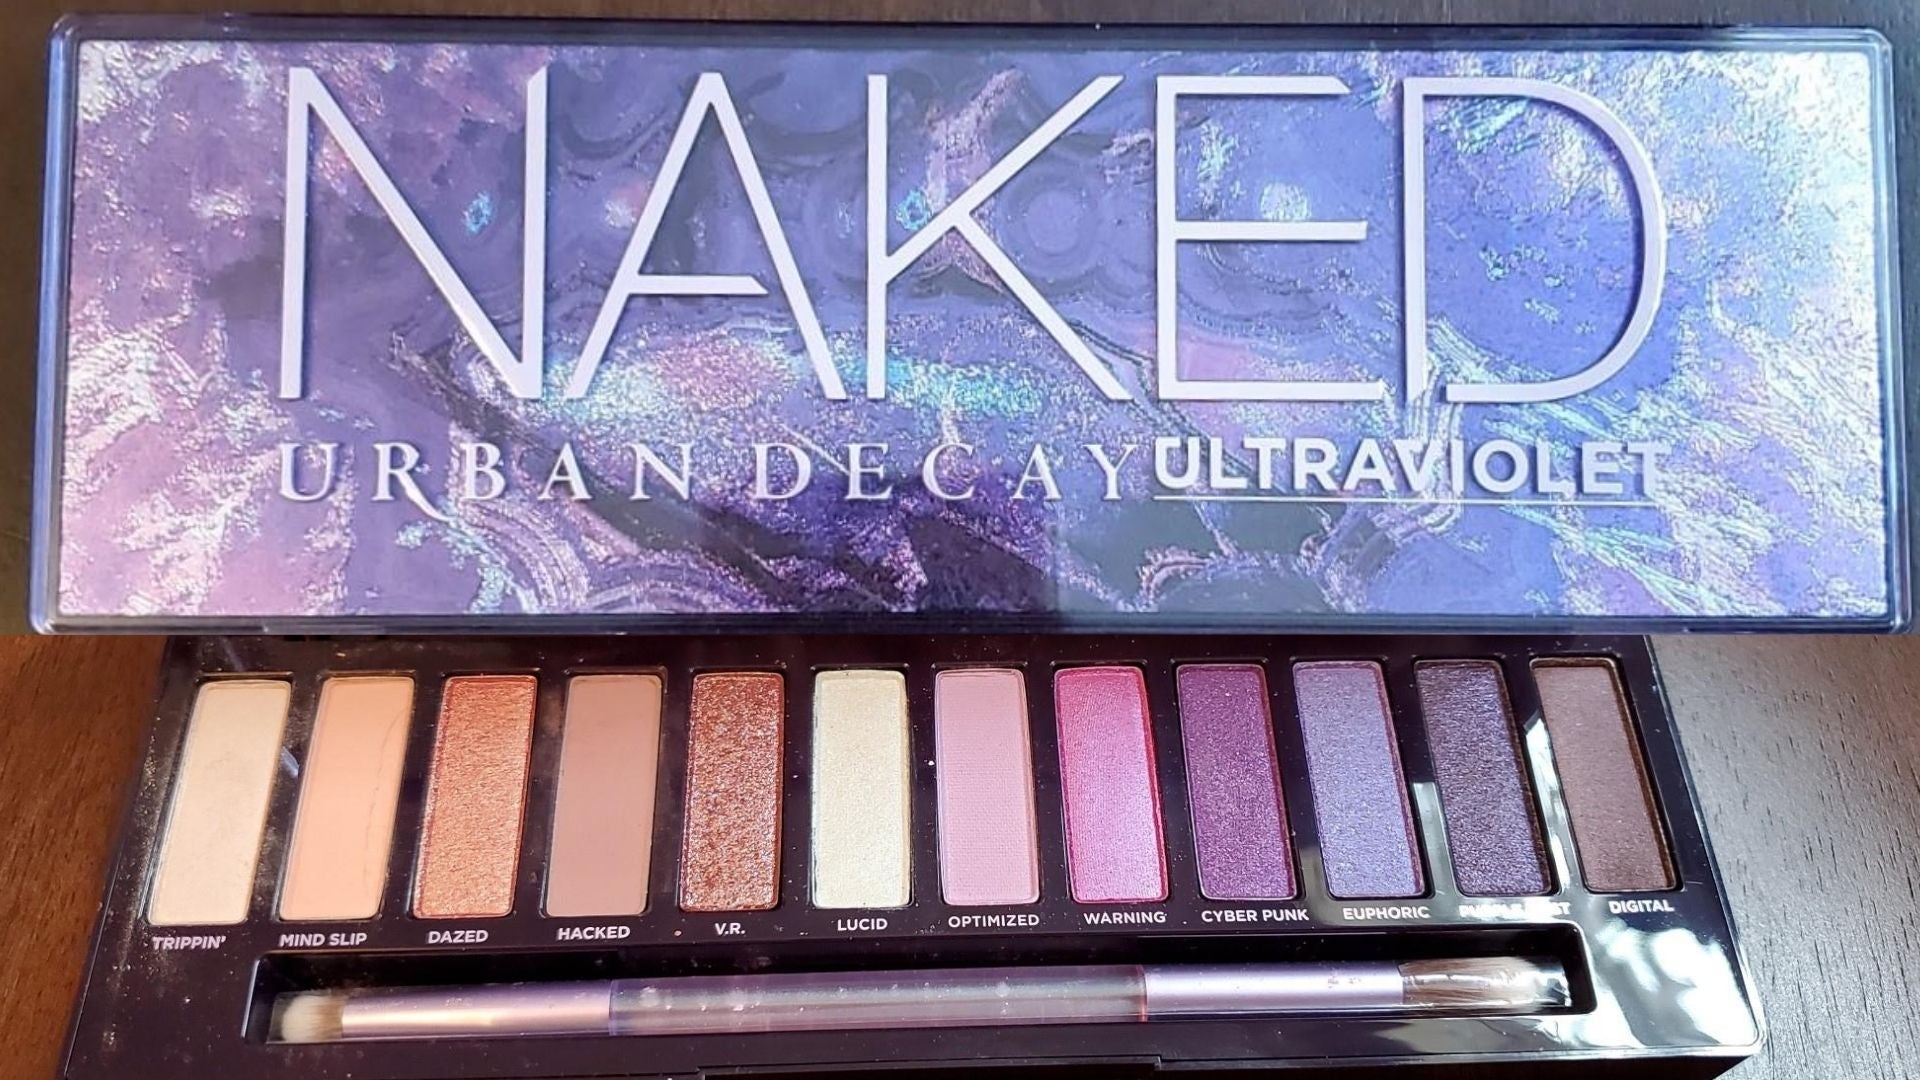 review, makeup, photos, trends, 2020, 2021, urban decay, naked eyeshadow palette, ultraviolet eyeshadow palette, best new eyeshadow palettes, cruelty free makeup, newest makeup releases